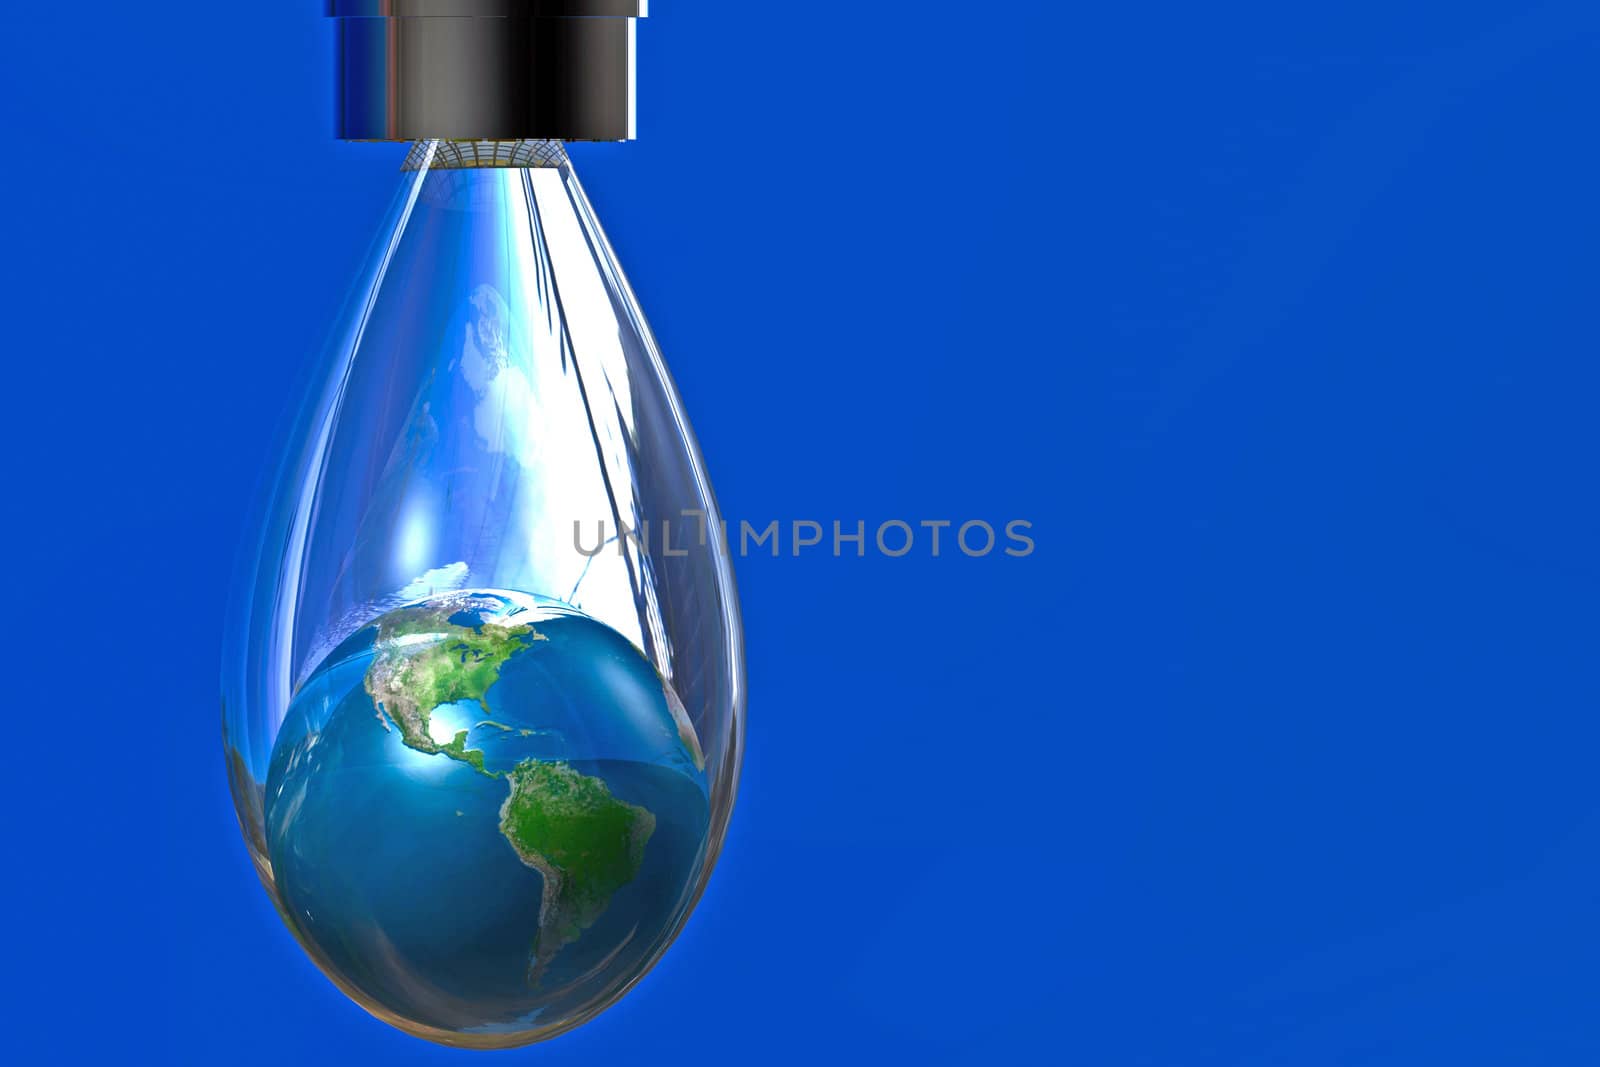 Earth in a drop of water under spigot